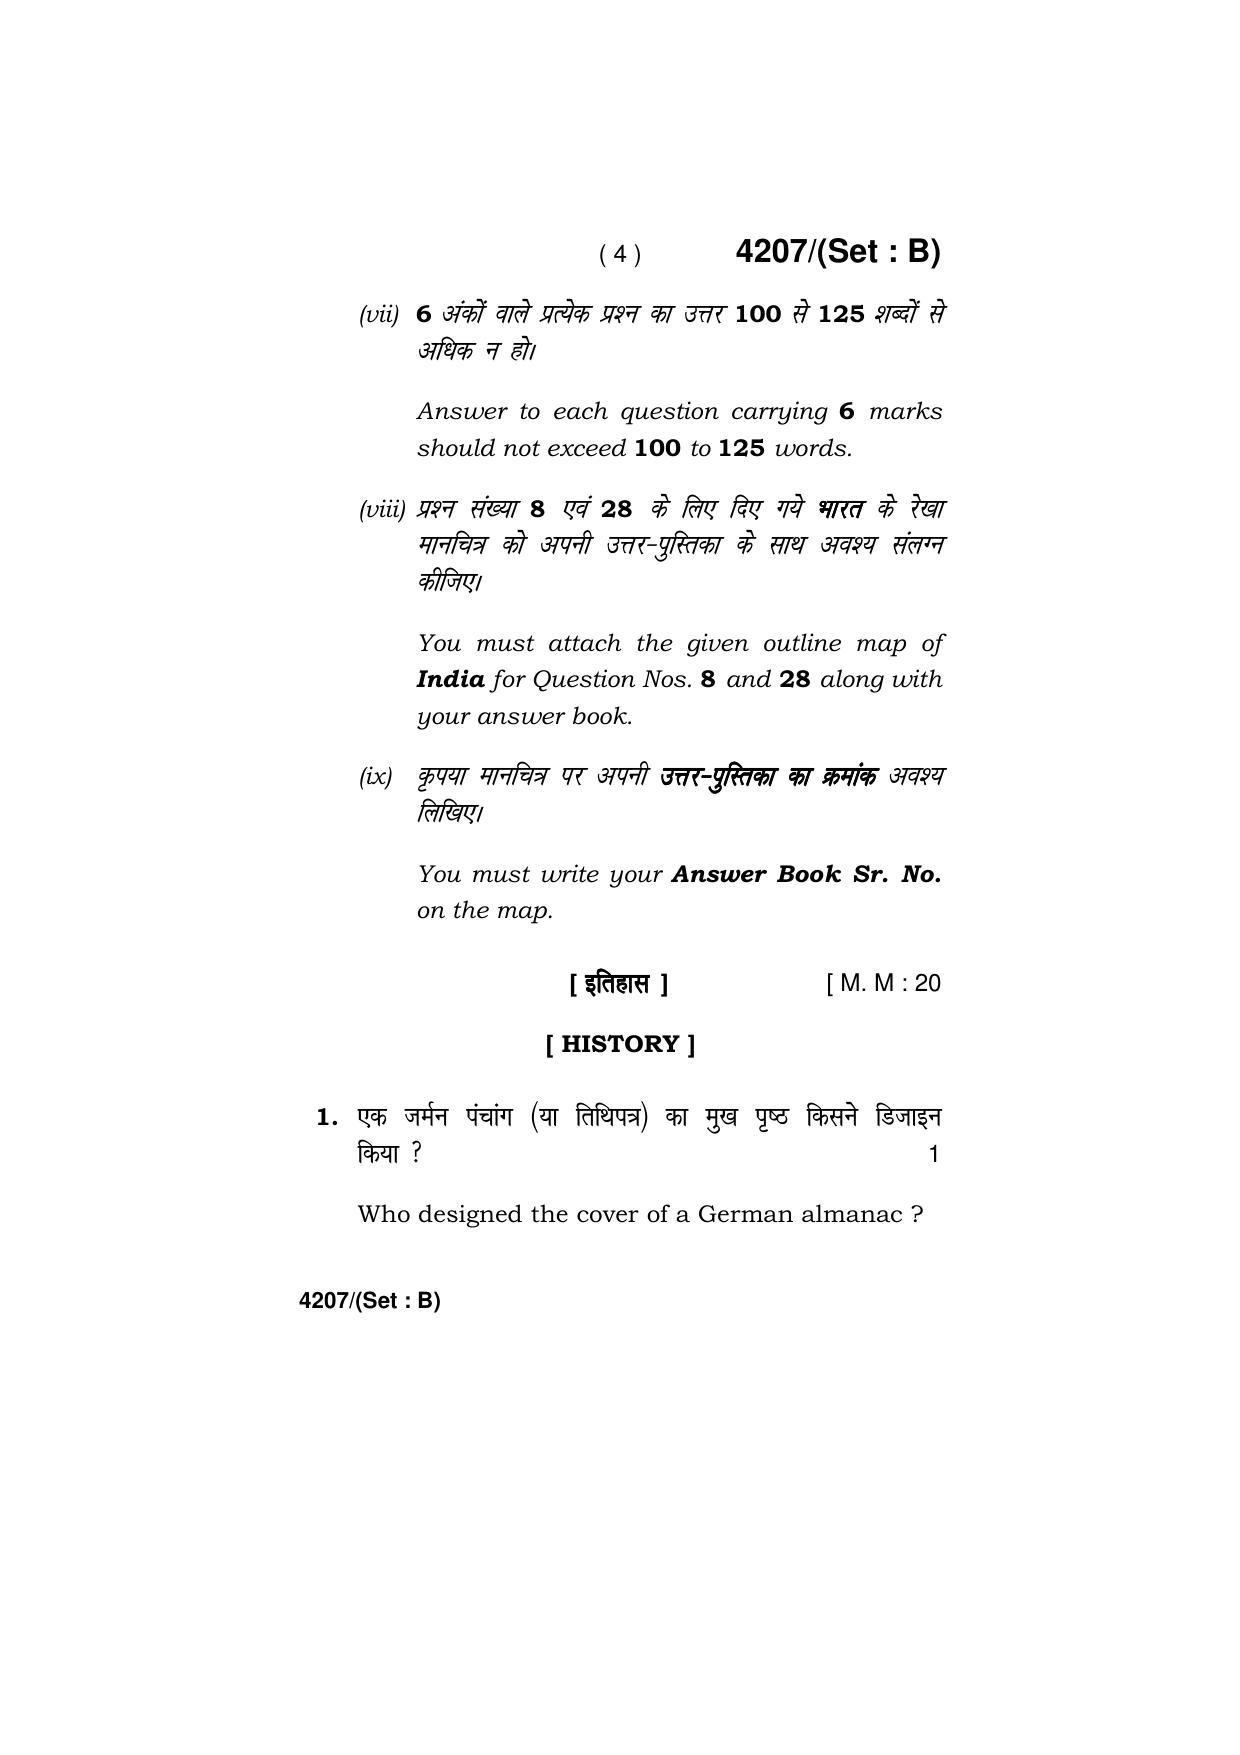 Haryana Board HBSE Class 10 Social Science (All Set) 2019 Question Paper - Page 19